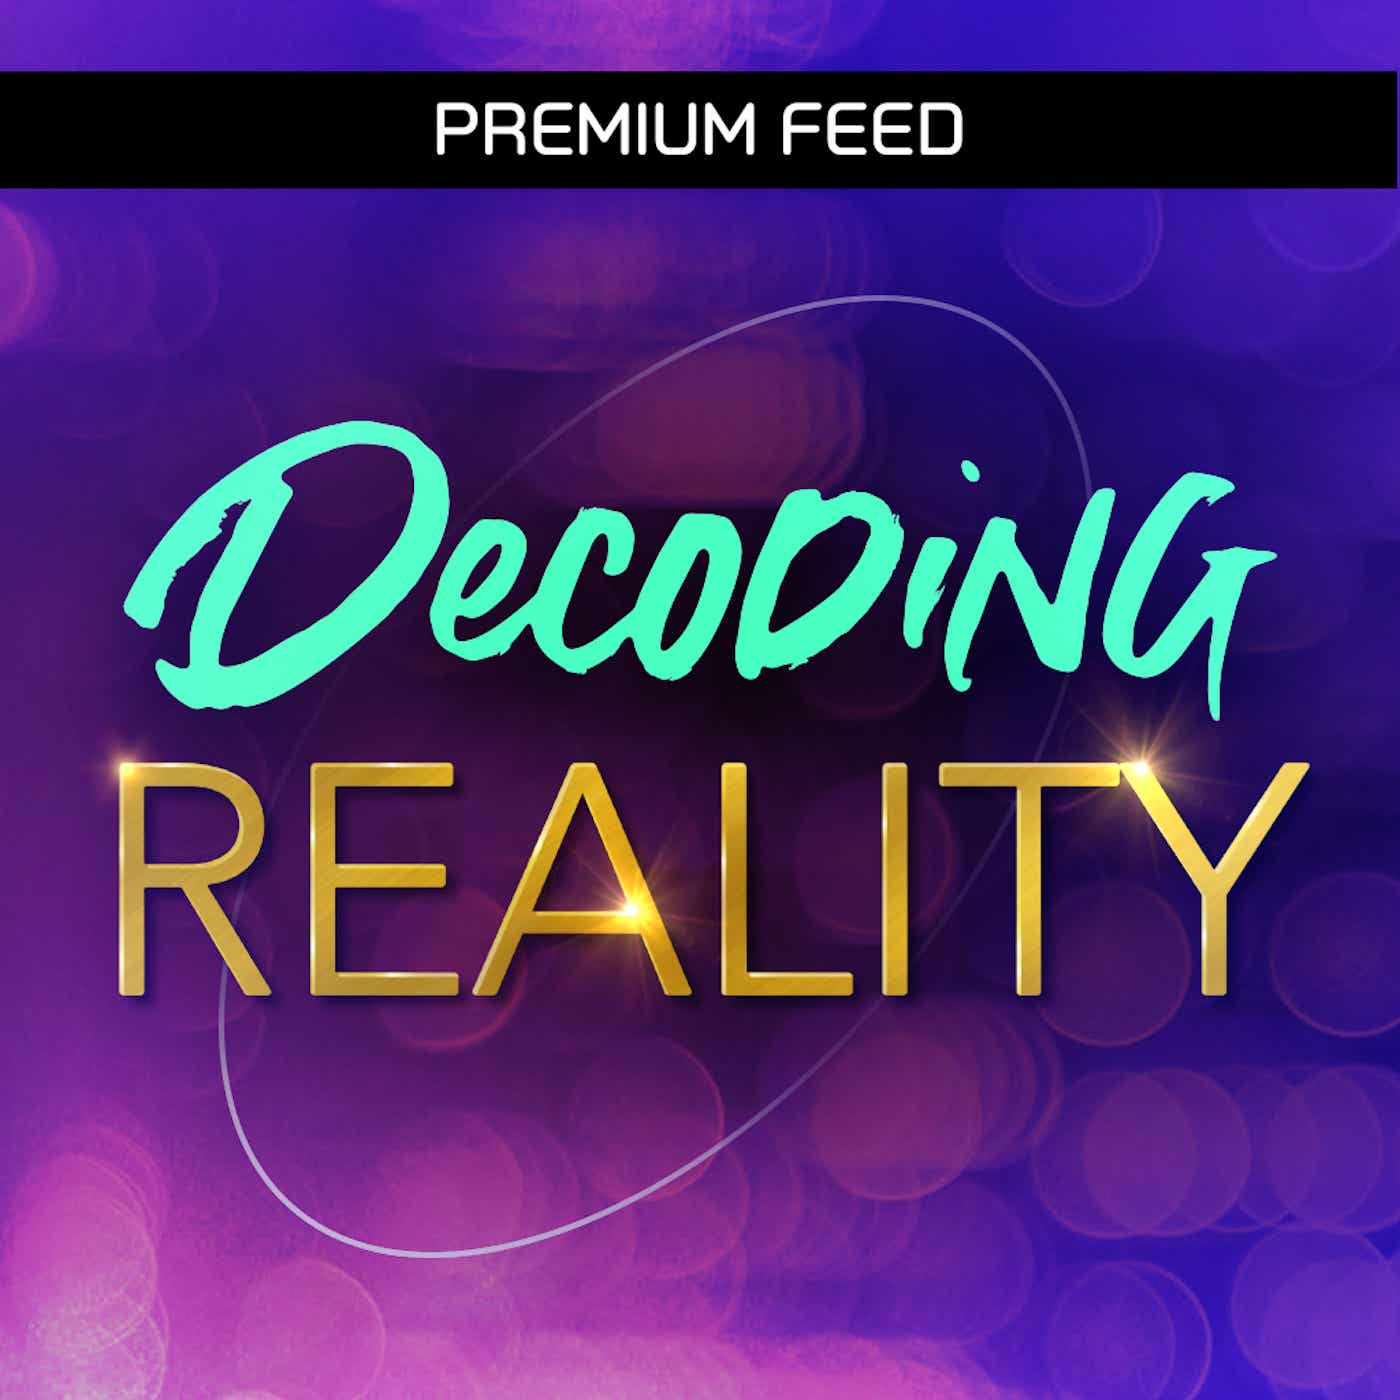 Decoding Reality (Premium Feed) (private feed for sraust@gmail.com)